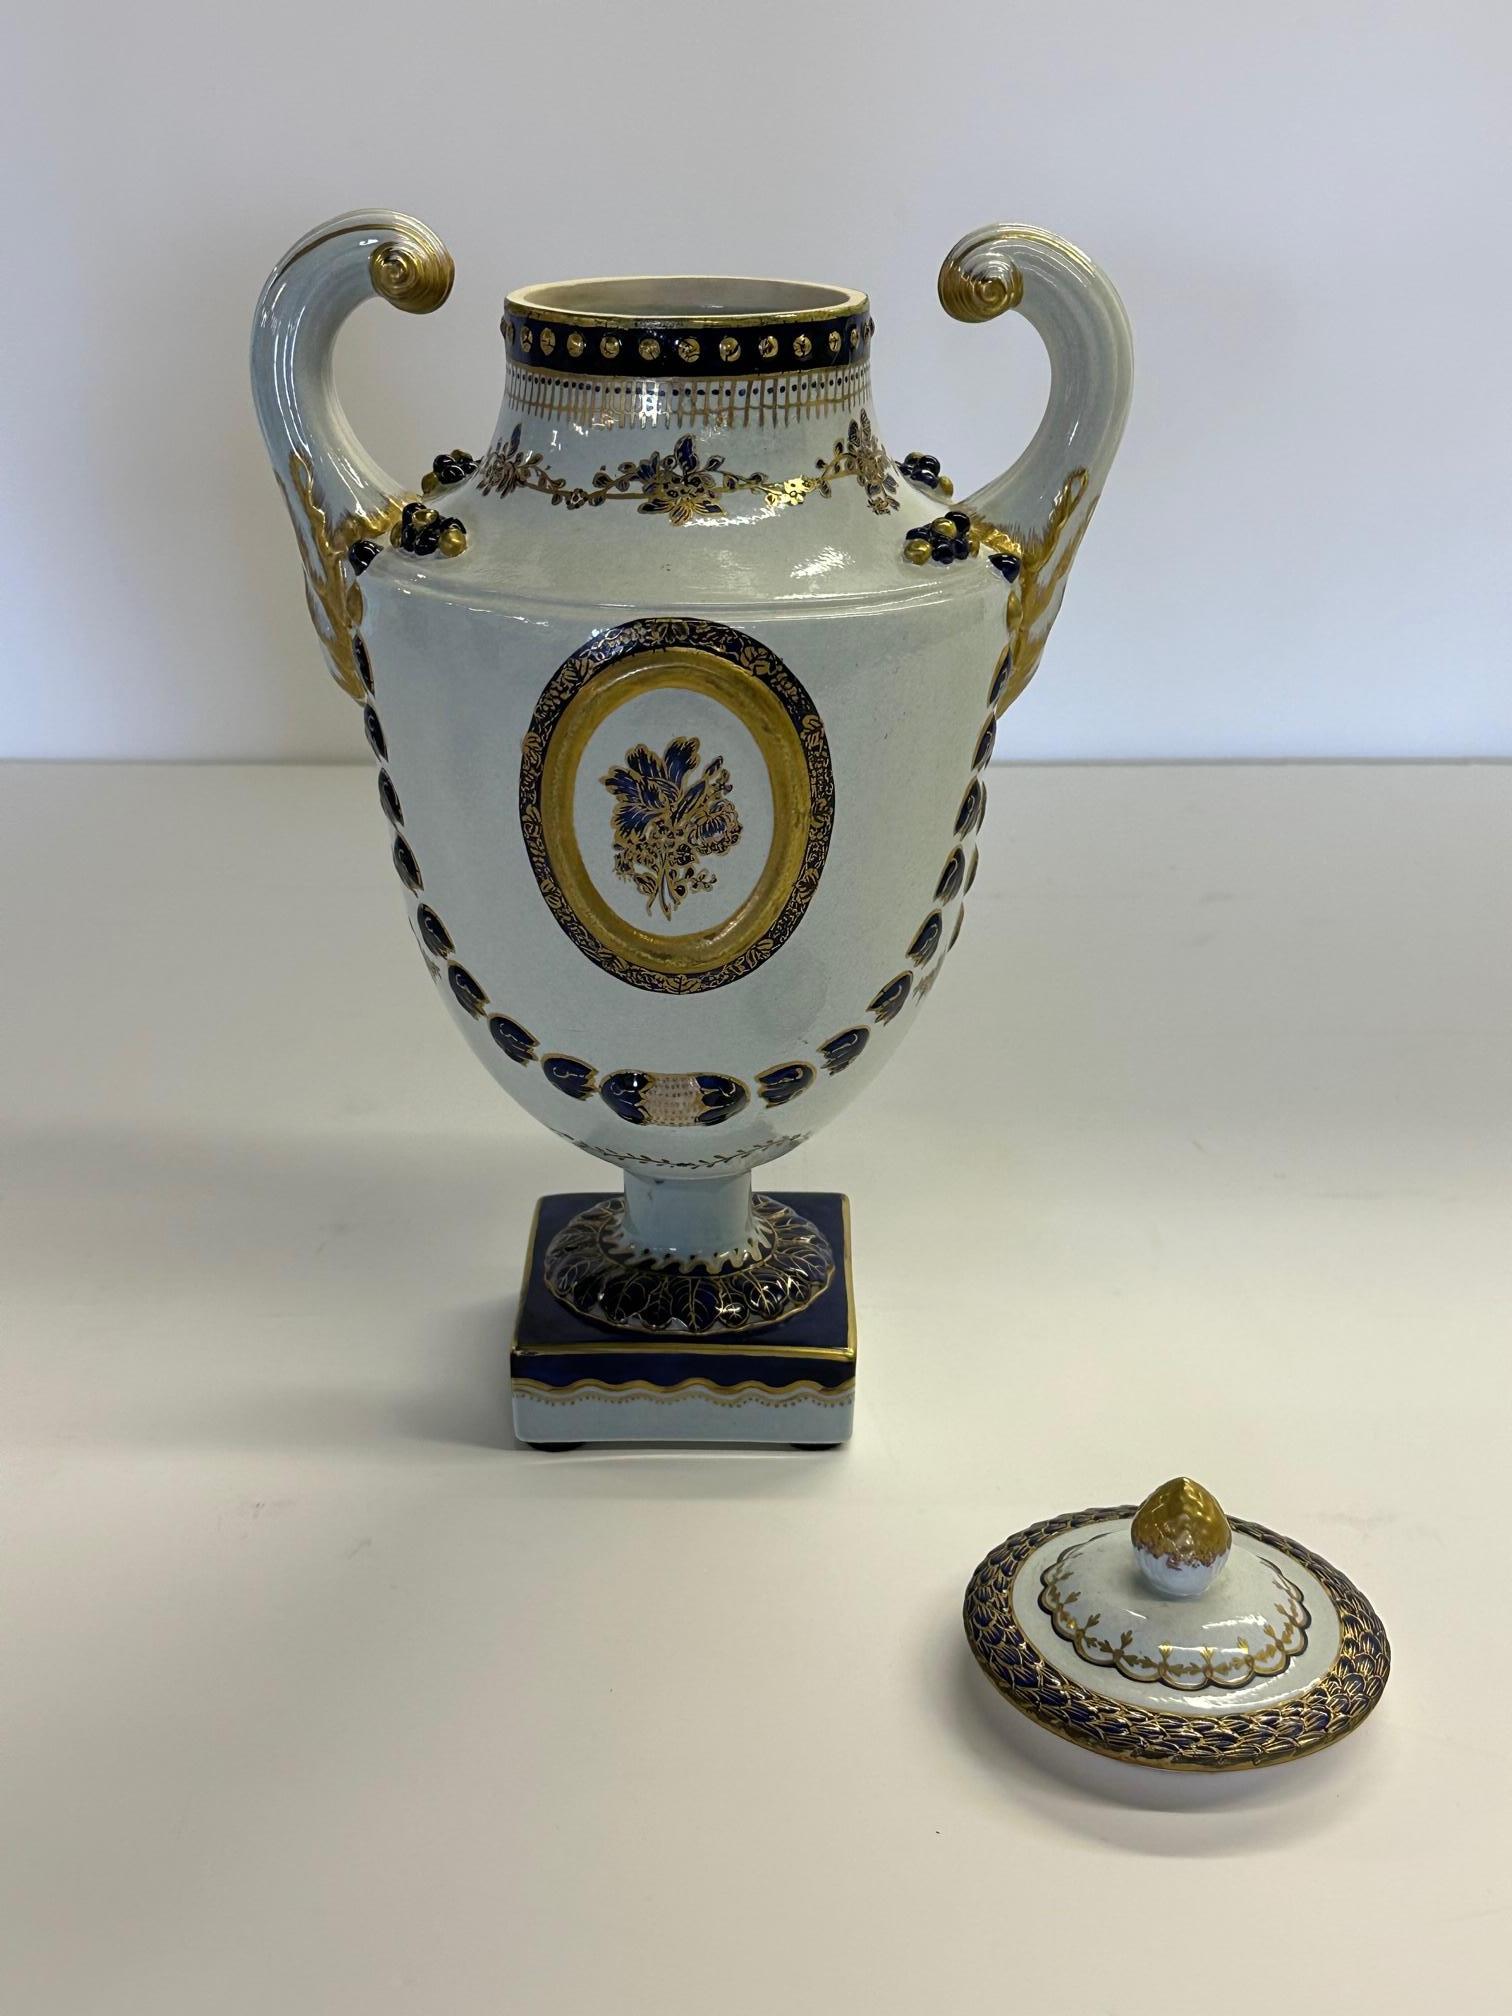 Beautiful classic pair of Mottahedeh painted Chinese Export style lidded urns having a striking color palette of white, blue and gold.
Bases arae 4 x 4.